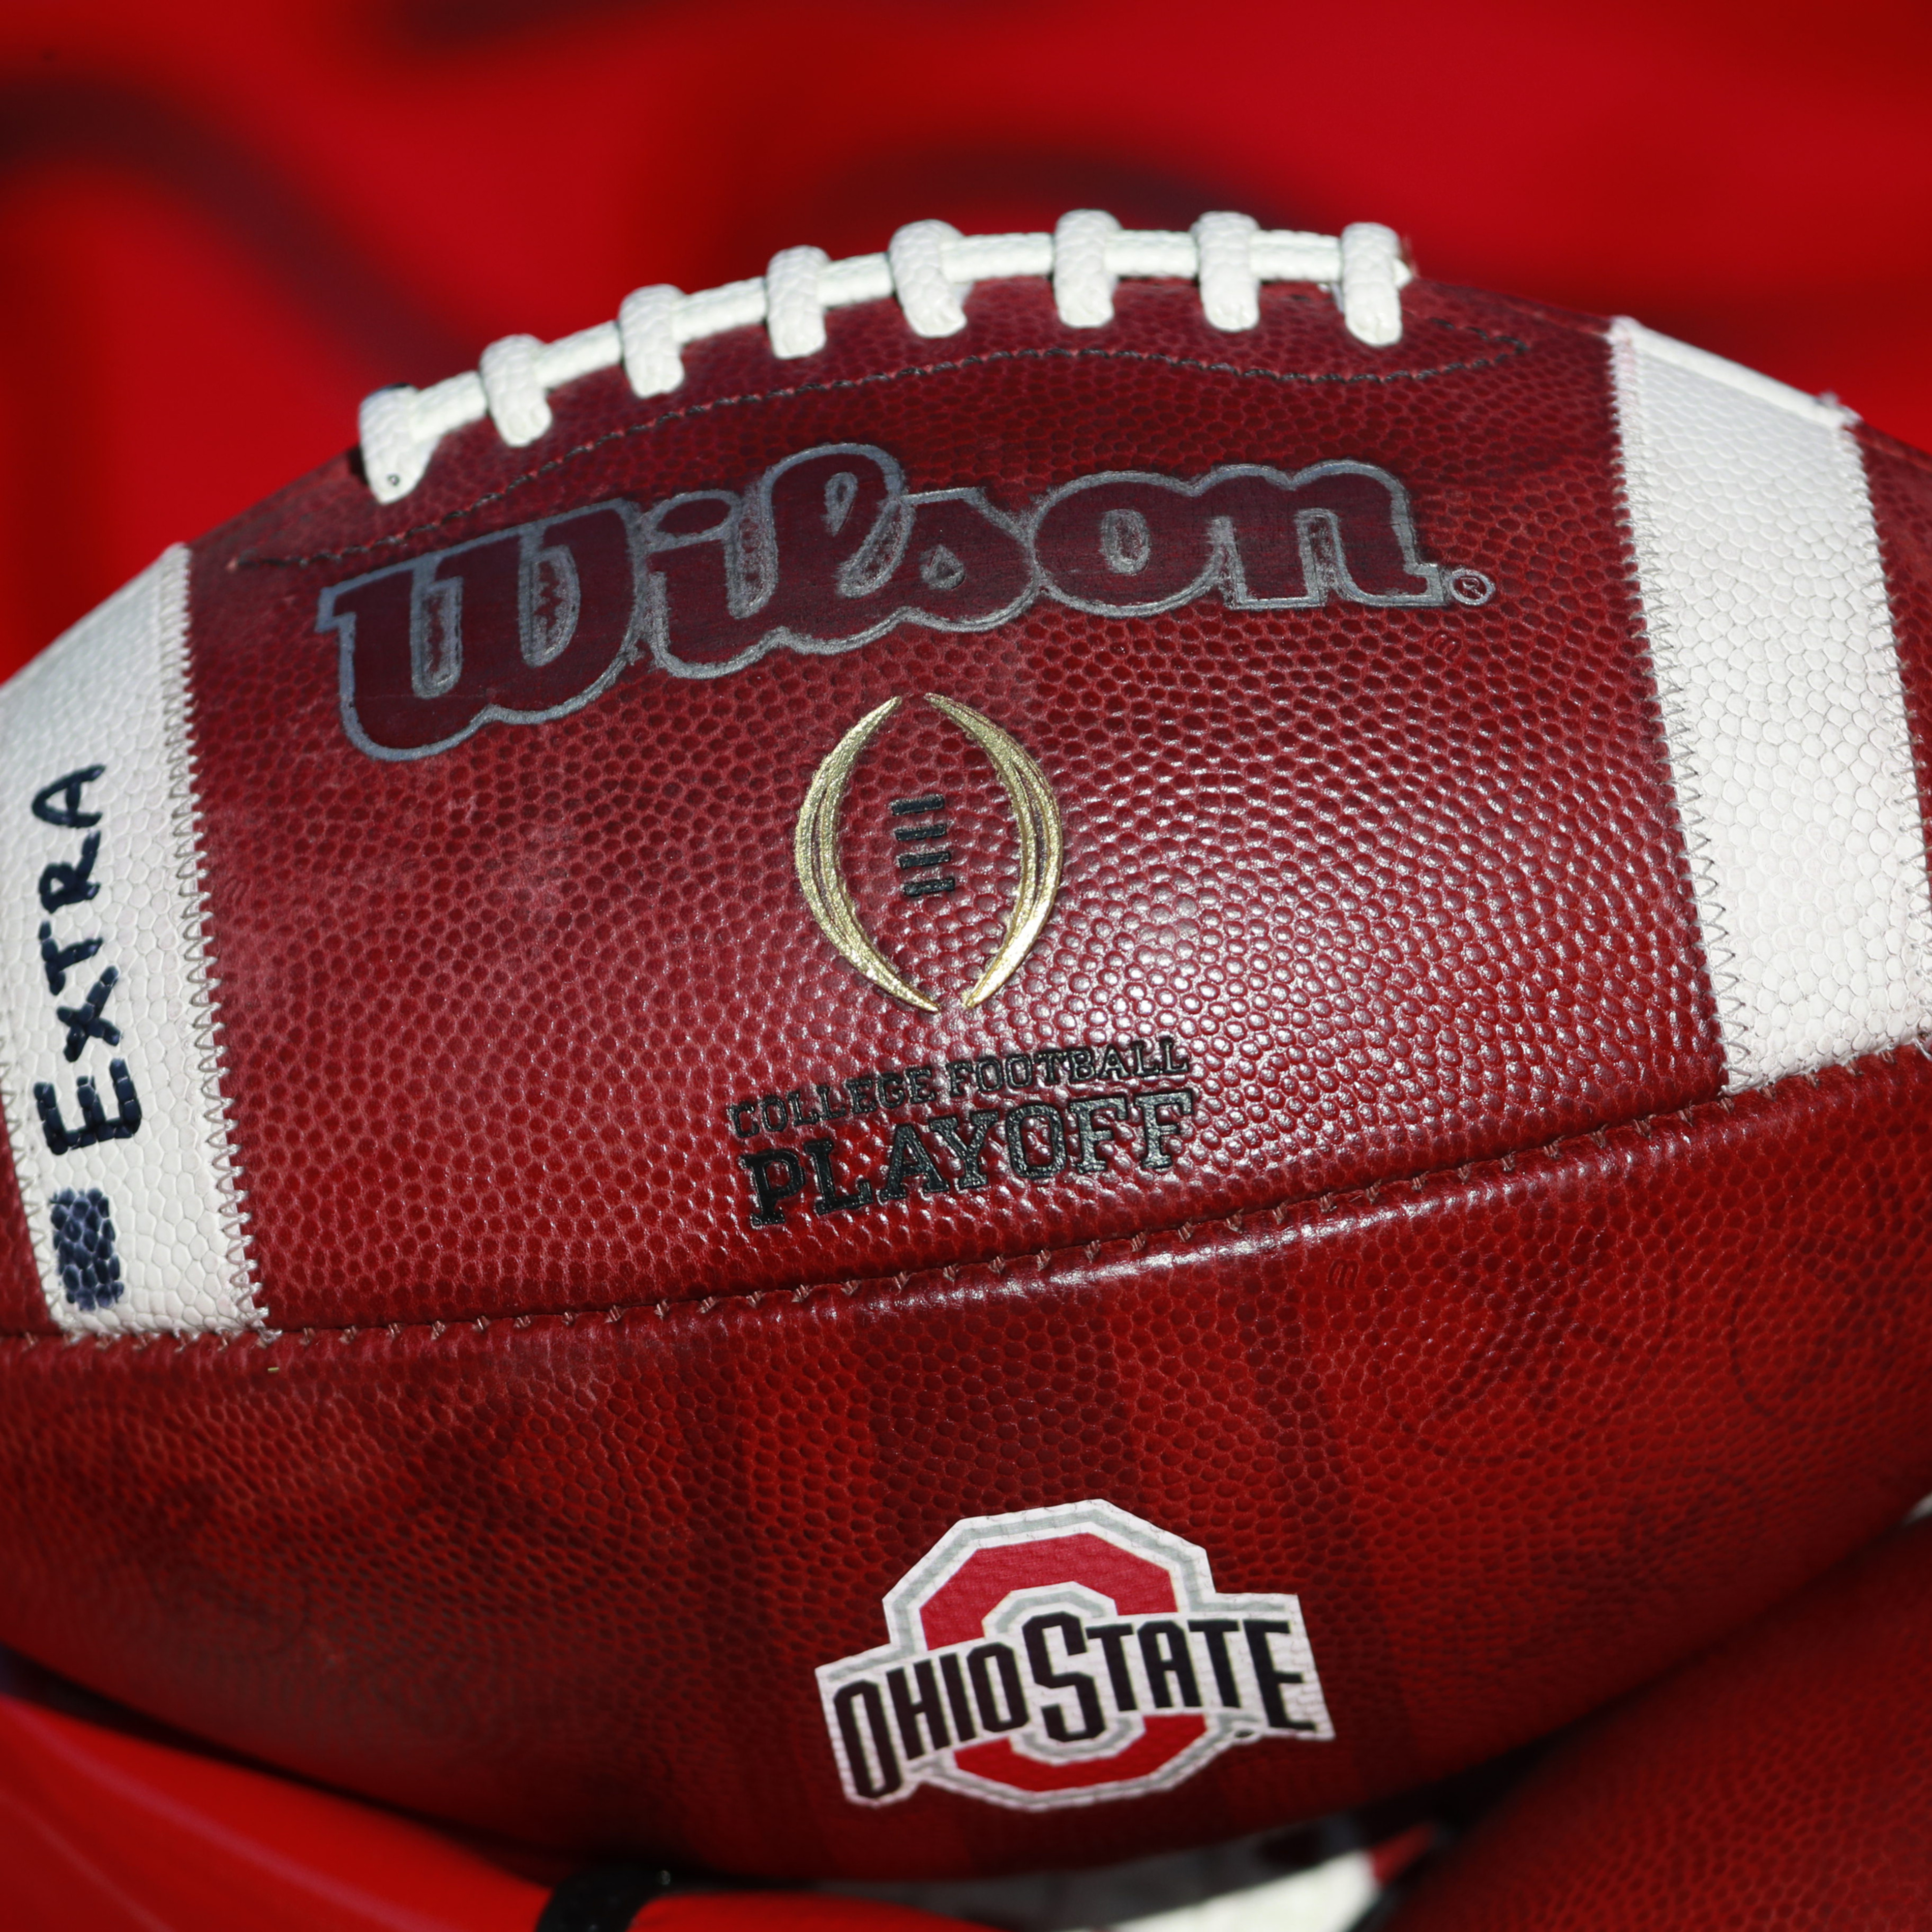 Ohio State Officially Approved for Trademark on 'THE' for Merchandising